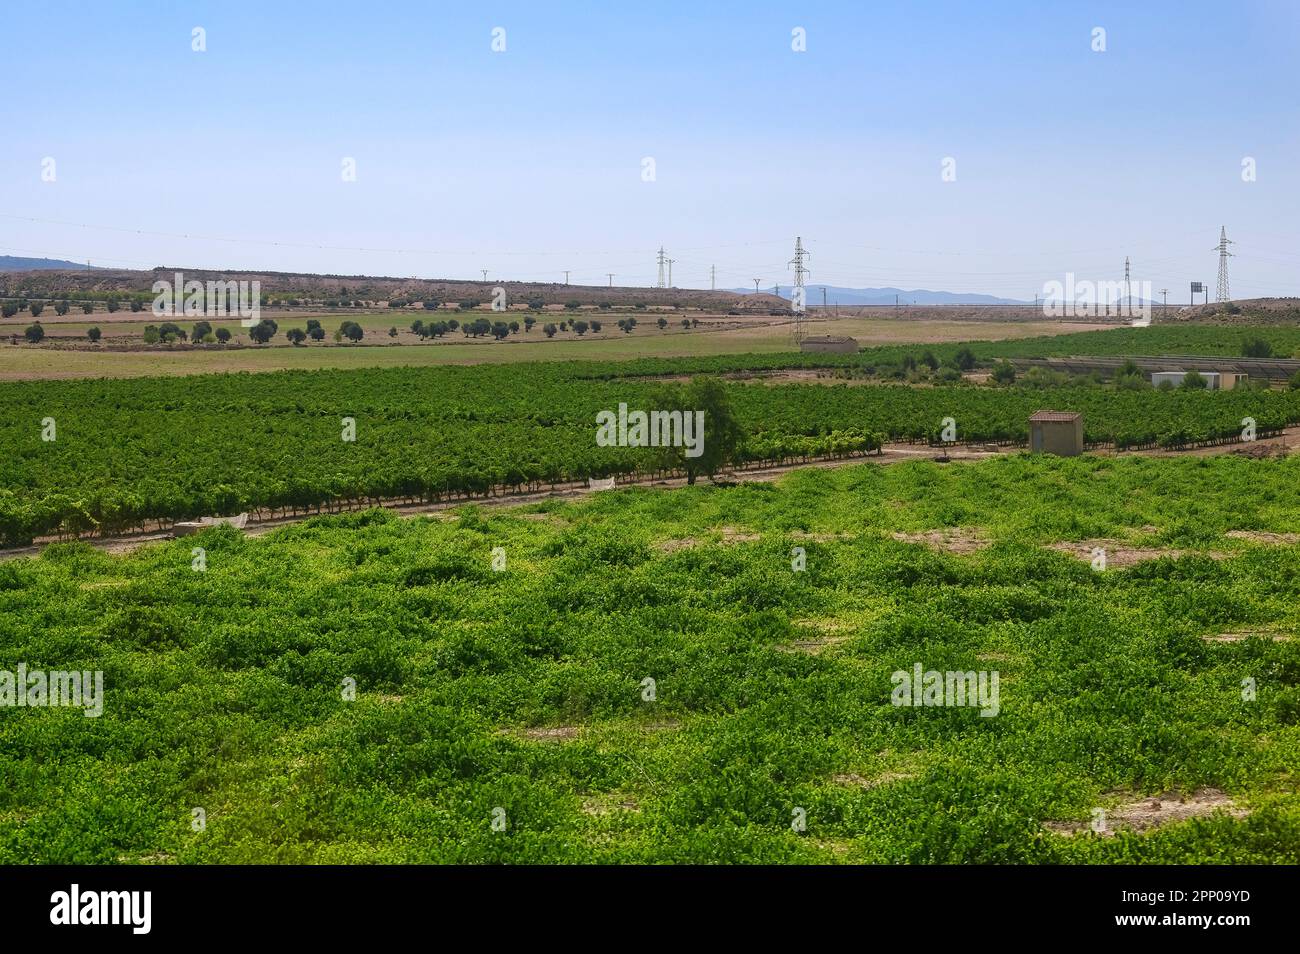 Spanish agriculture field with no people Stock Photo